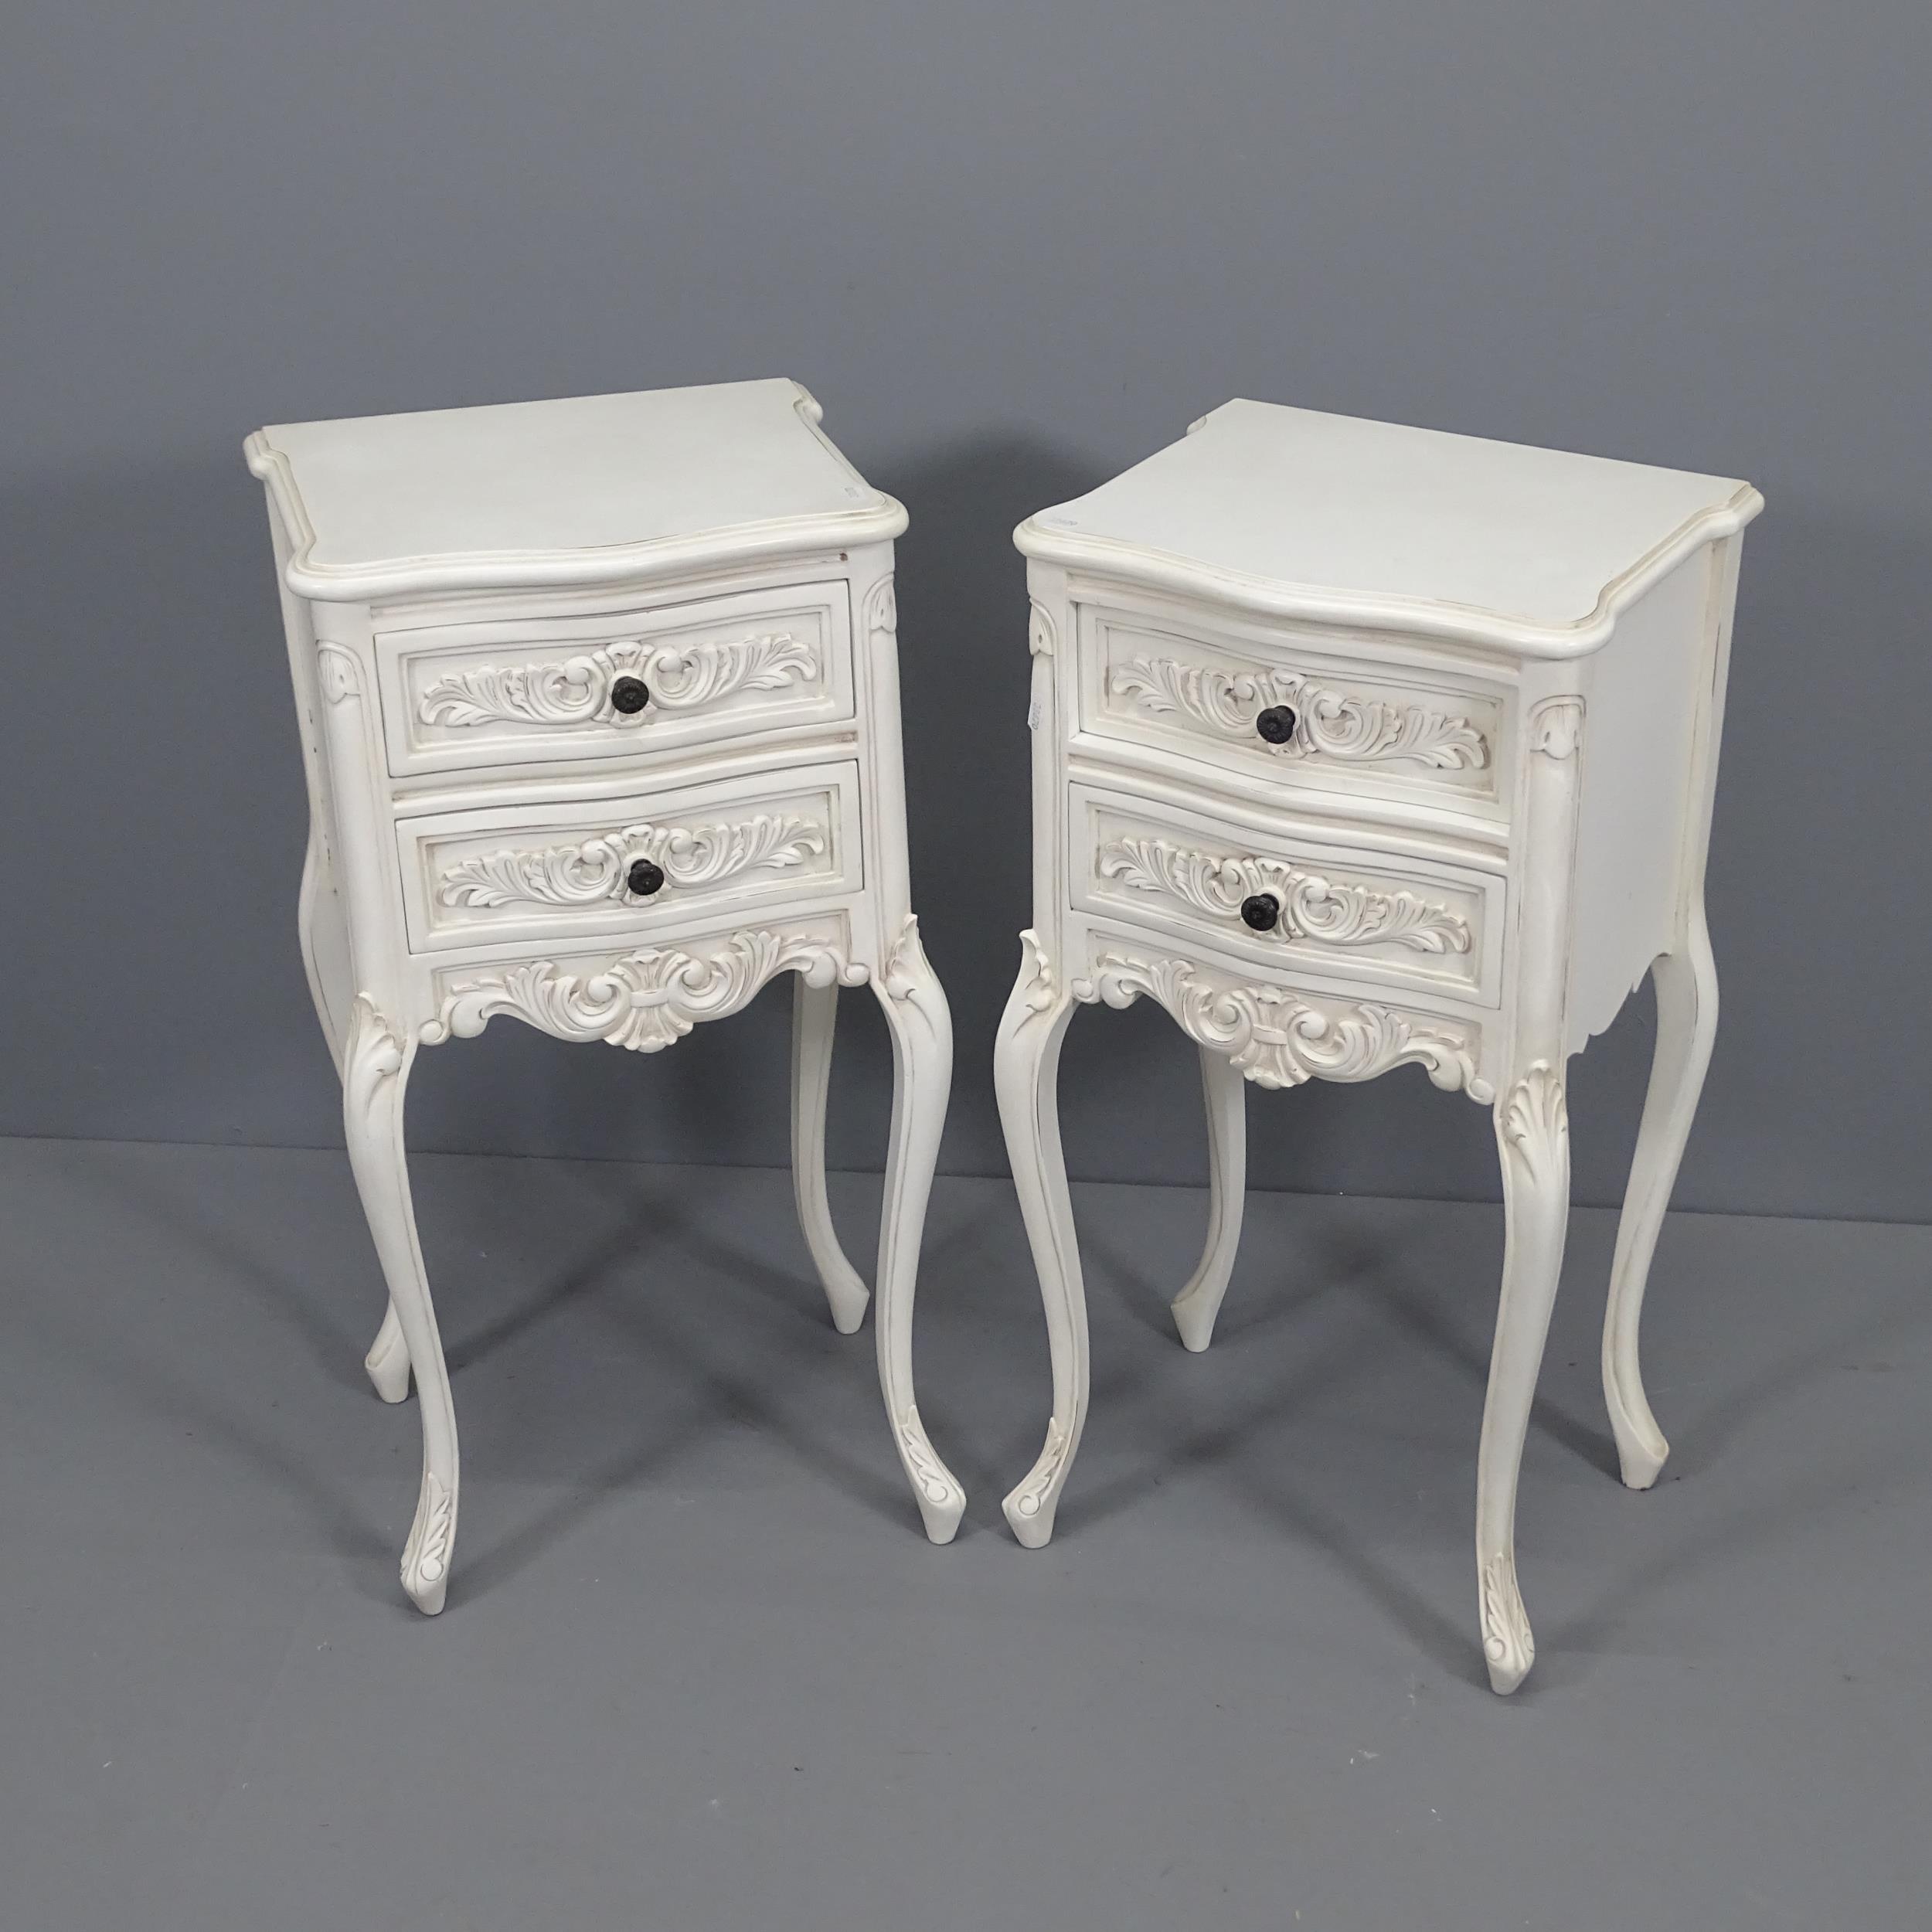 A pair of French style painted 2-drawer bedside chests with maker's label to underside for Coach